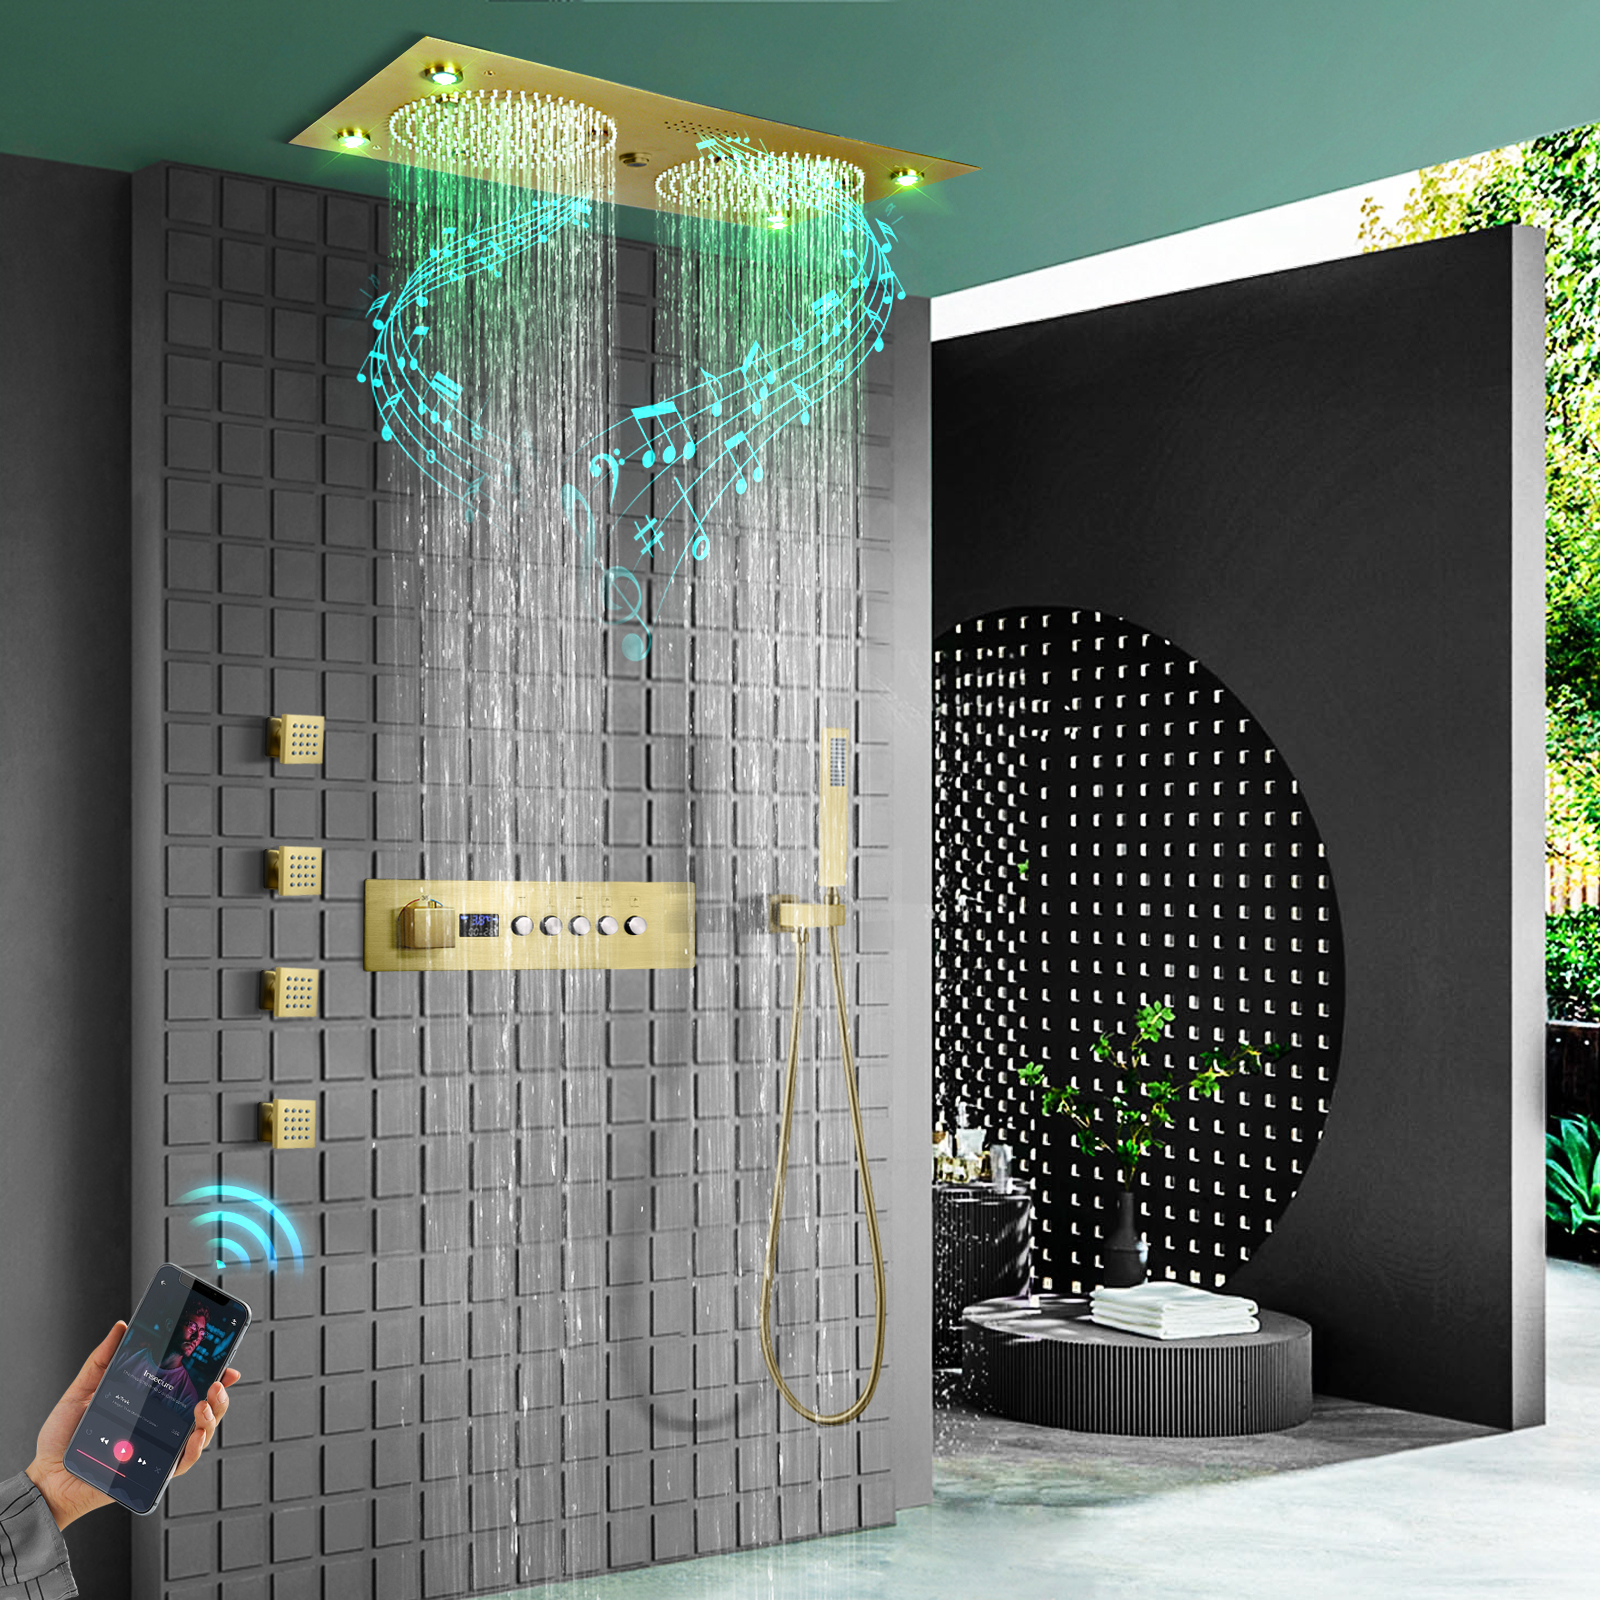 LED, Thermostatic, and Stainless Steel Shower Heads